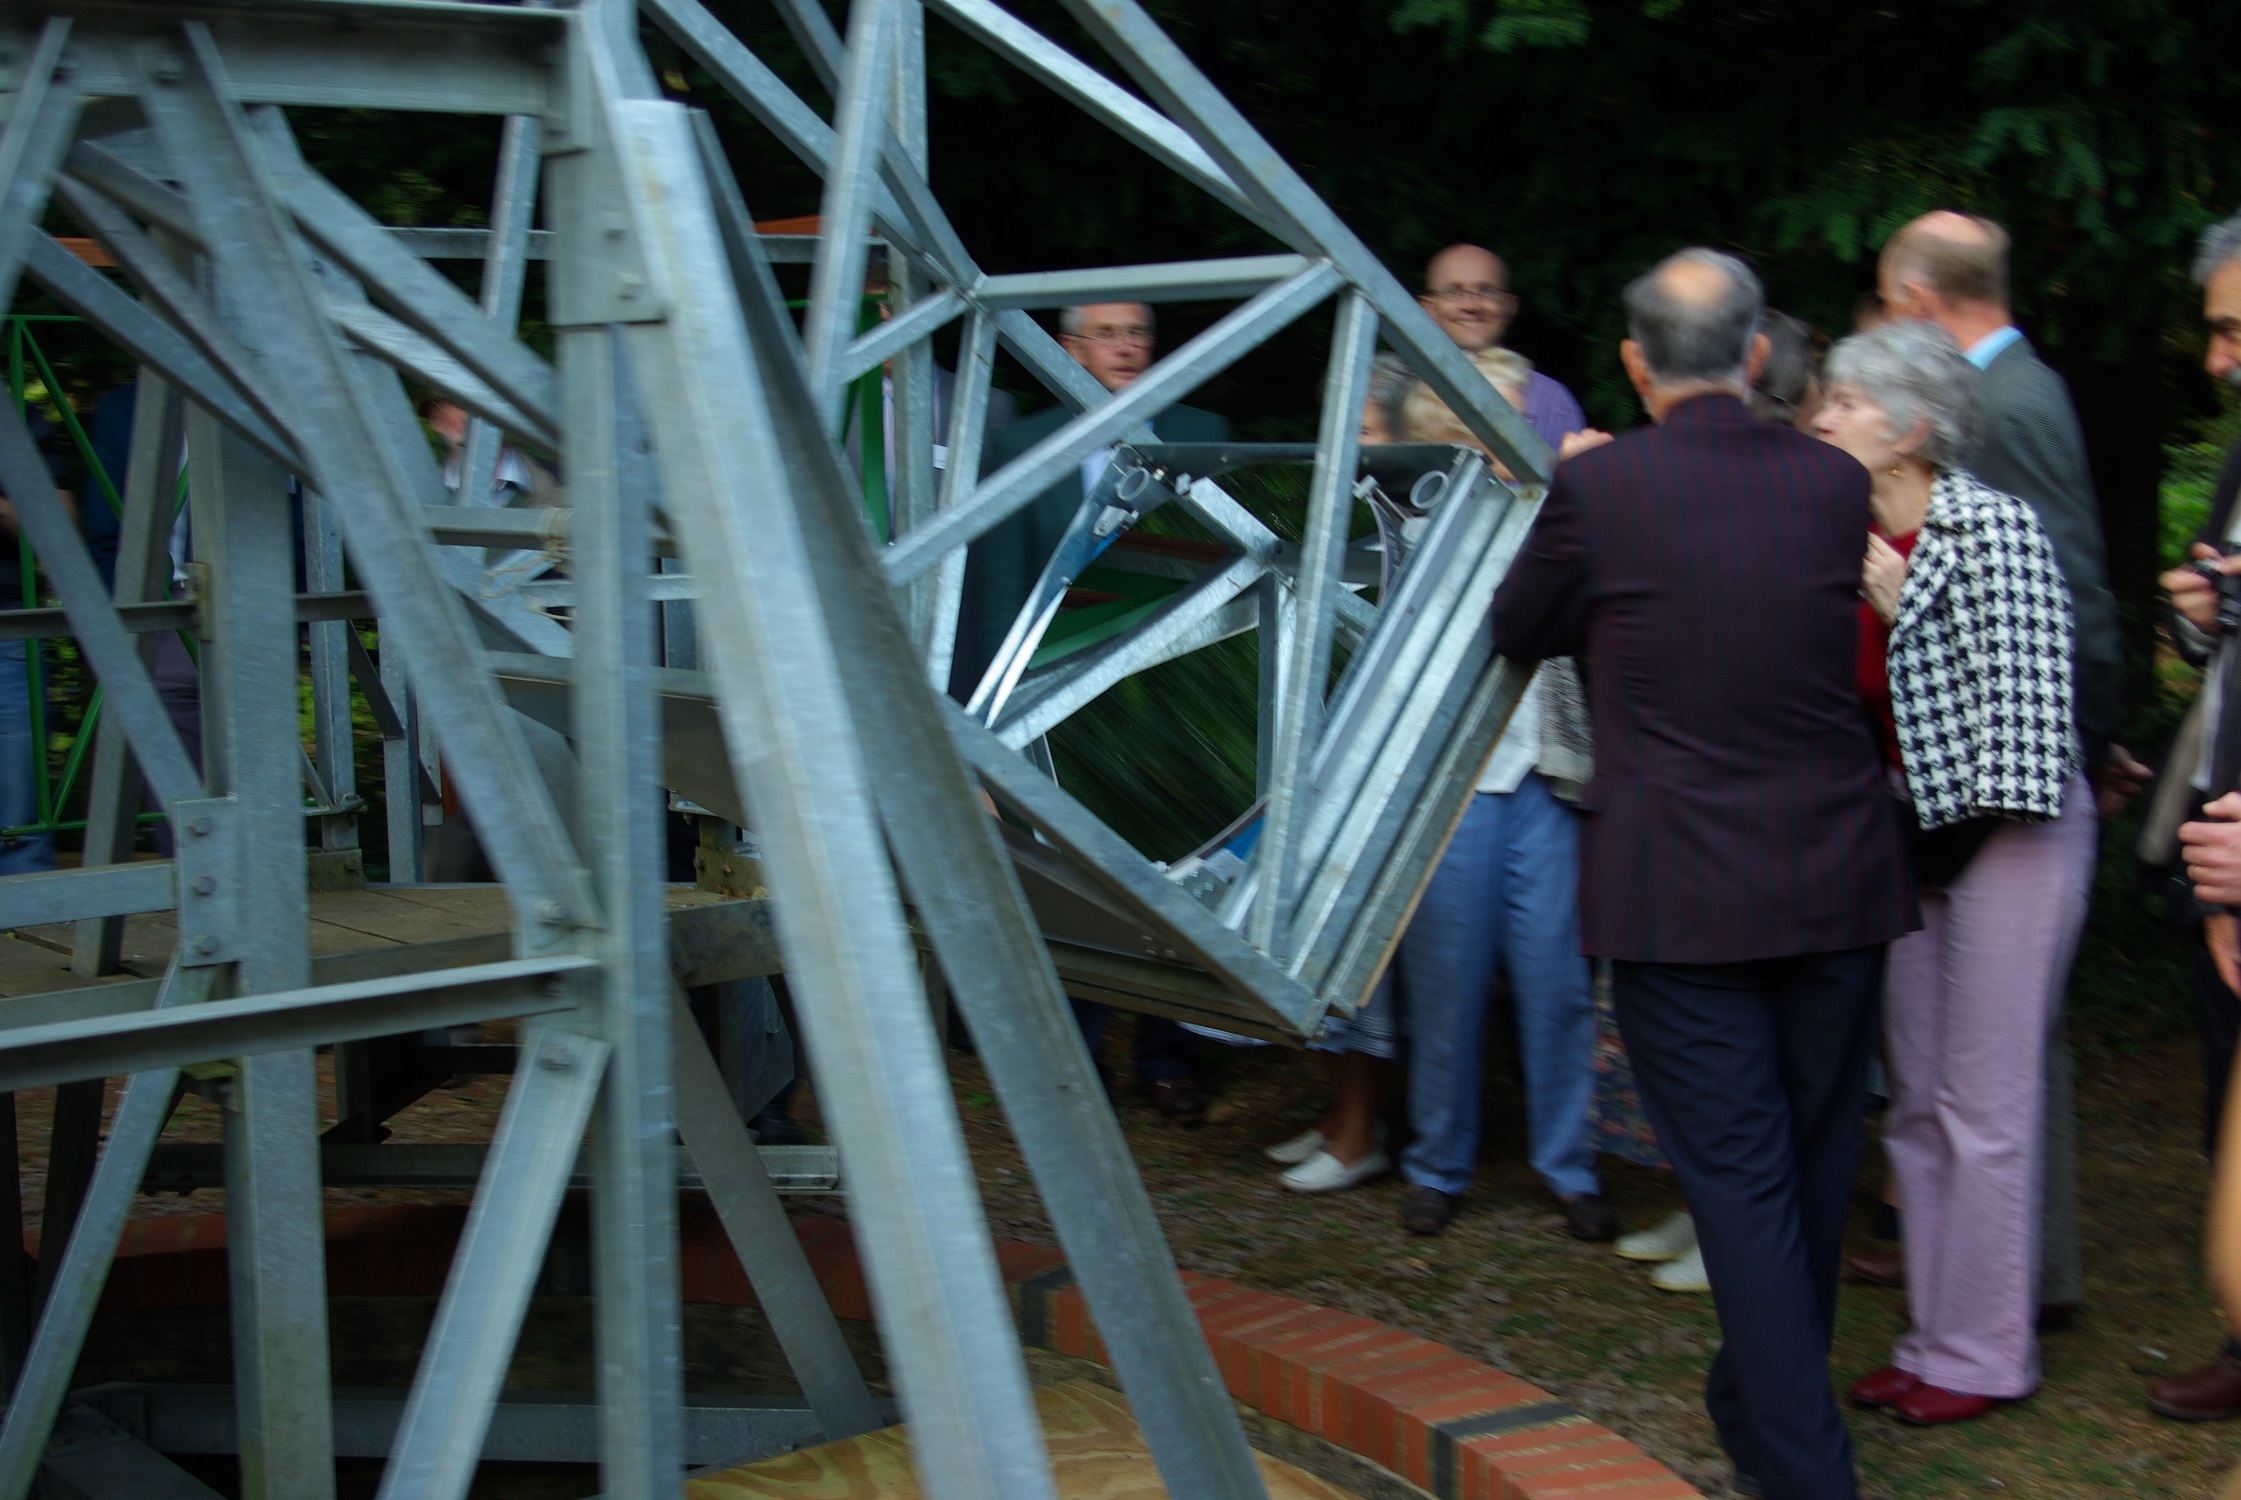 The 30" mirror (before the improvements) at the formal opening of the Millennium Telescope